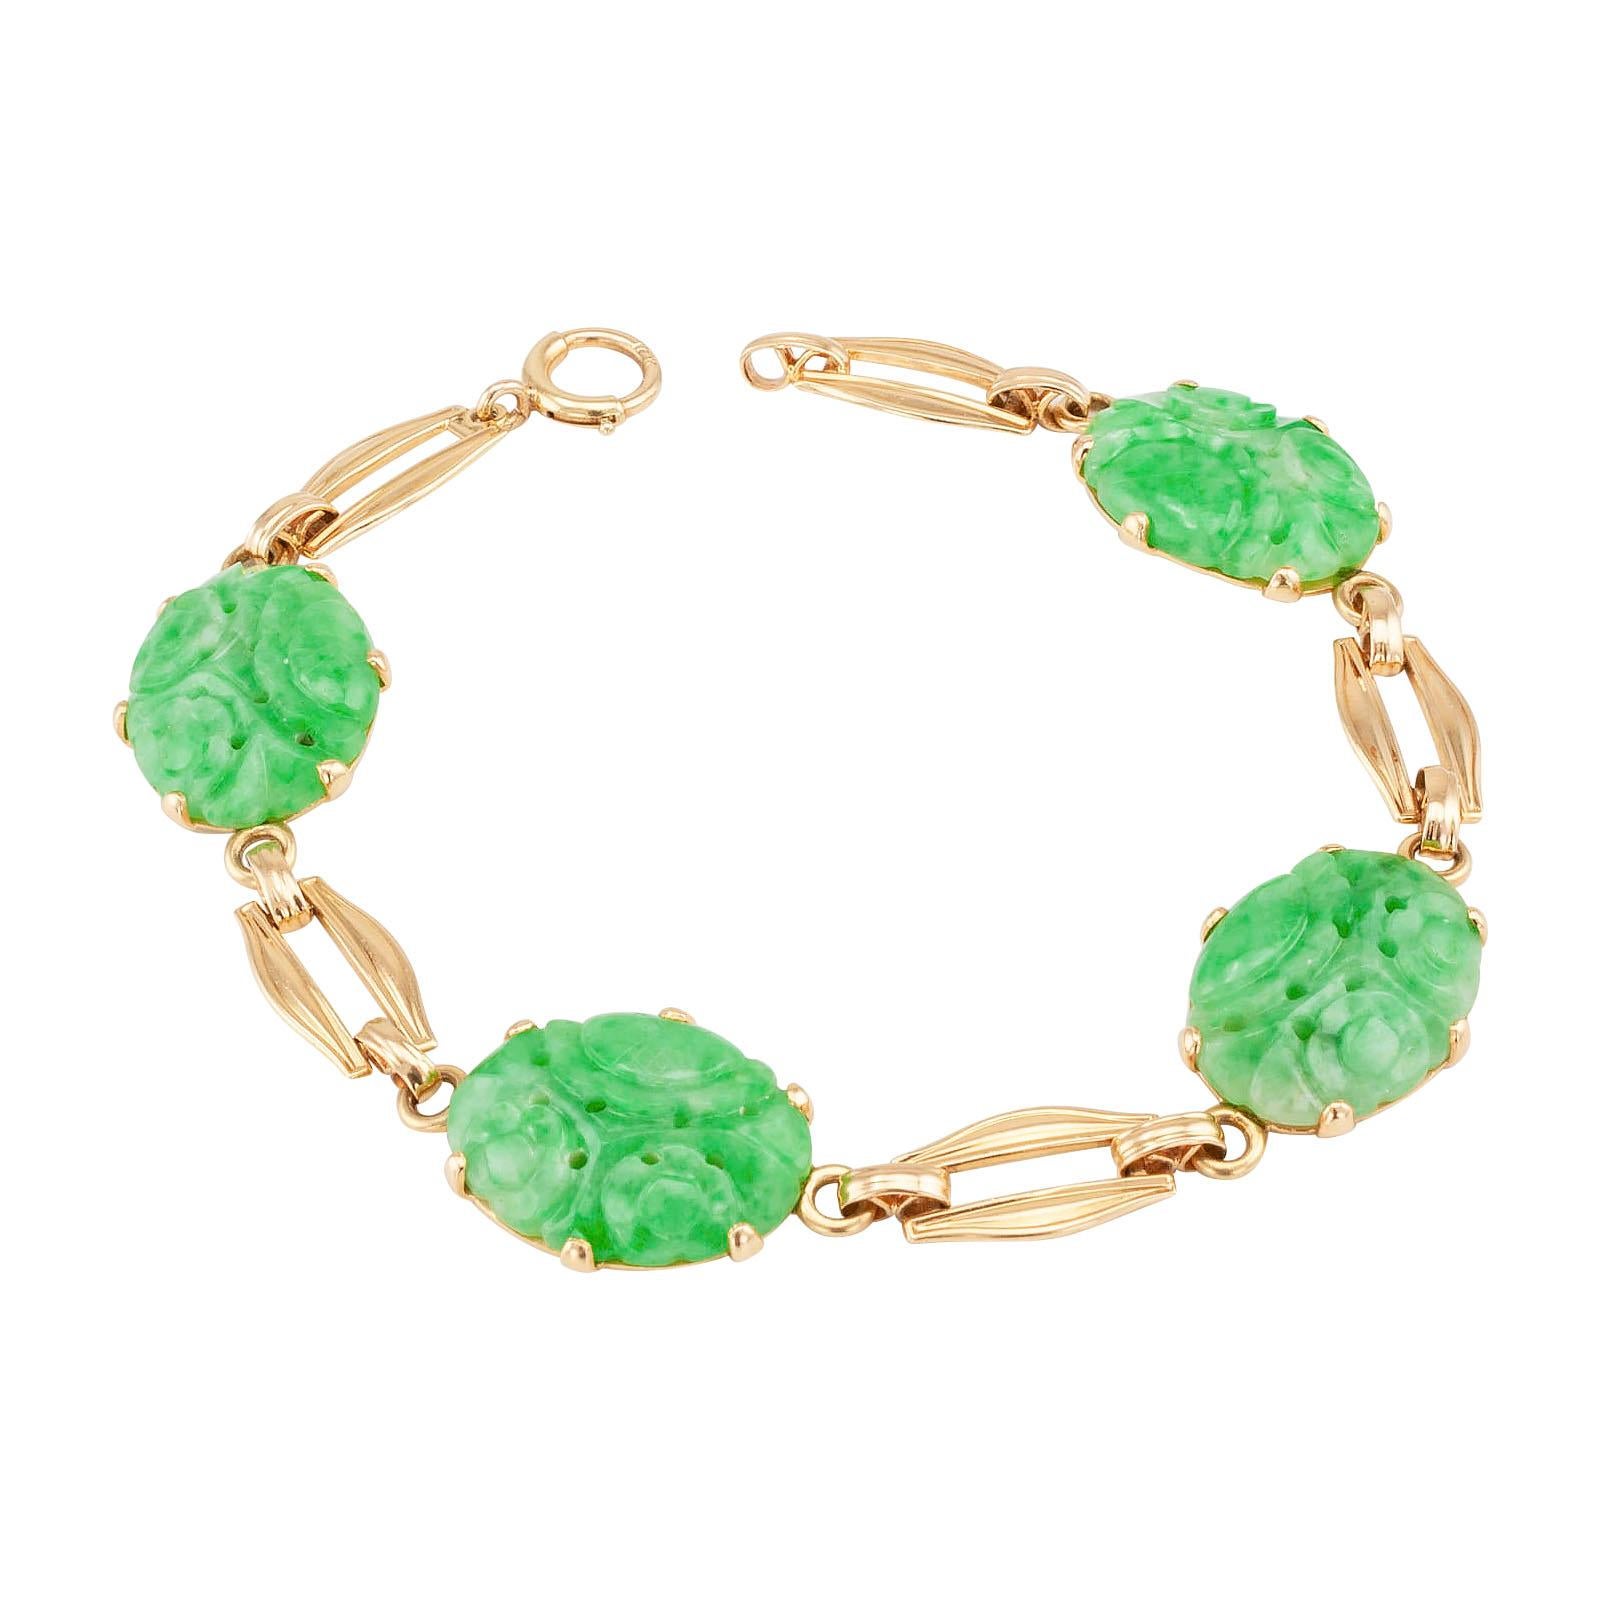 Carved jadeite and gold link bracelet by Church & Co.  circa 1950.

DETAILS:
GEMSTONES:  four oval light green carved jadeites.

METAL:  14-karat yellow gold.

HALLMARKS:  maker’s mark for Church & Co.

MEASUREMENTS:  approximately 7 ½” (19.0 cm)